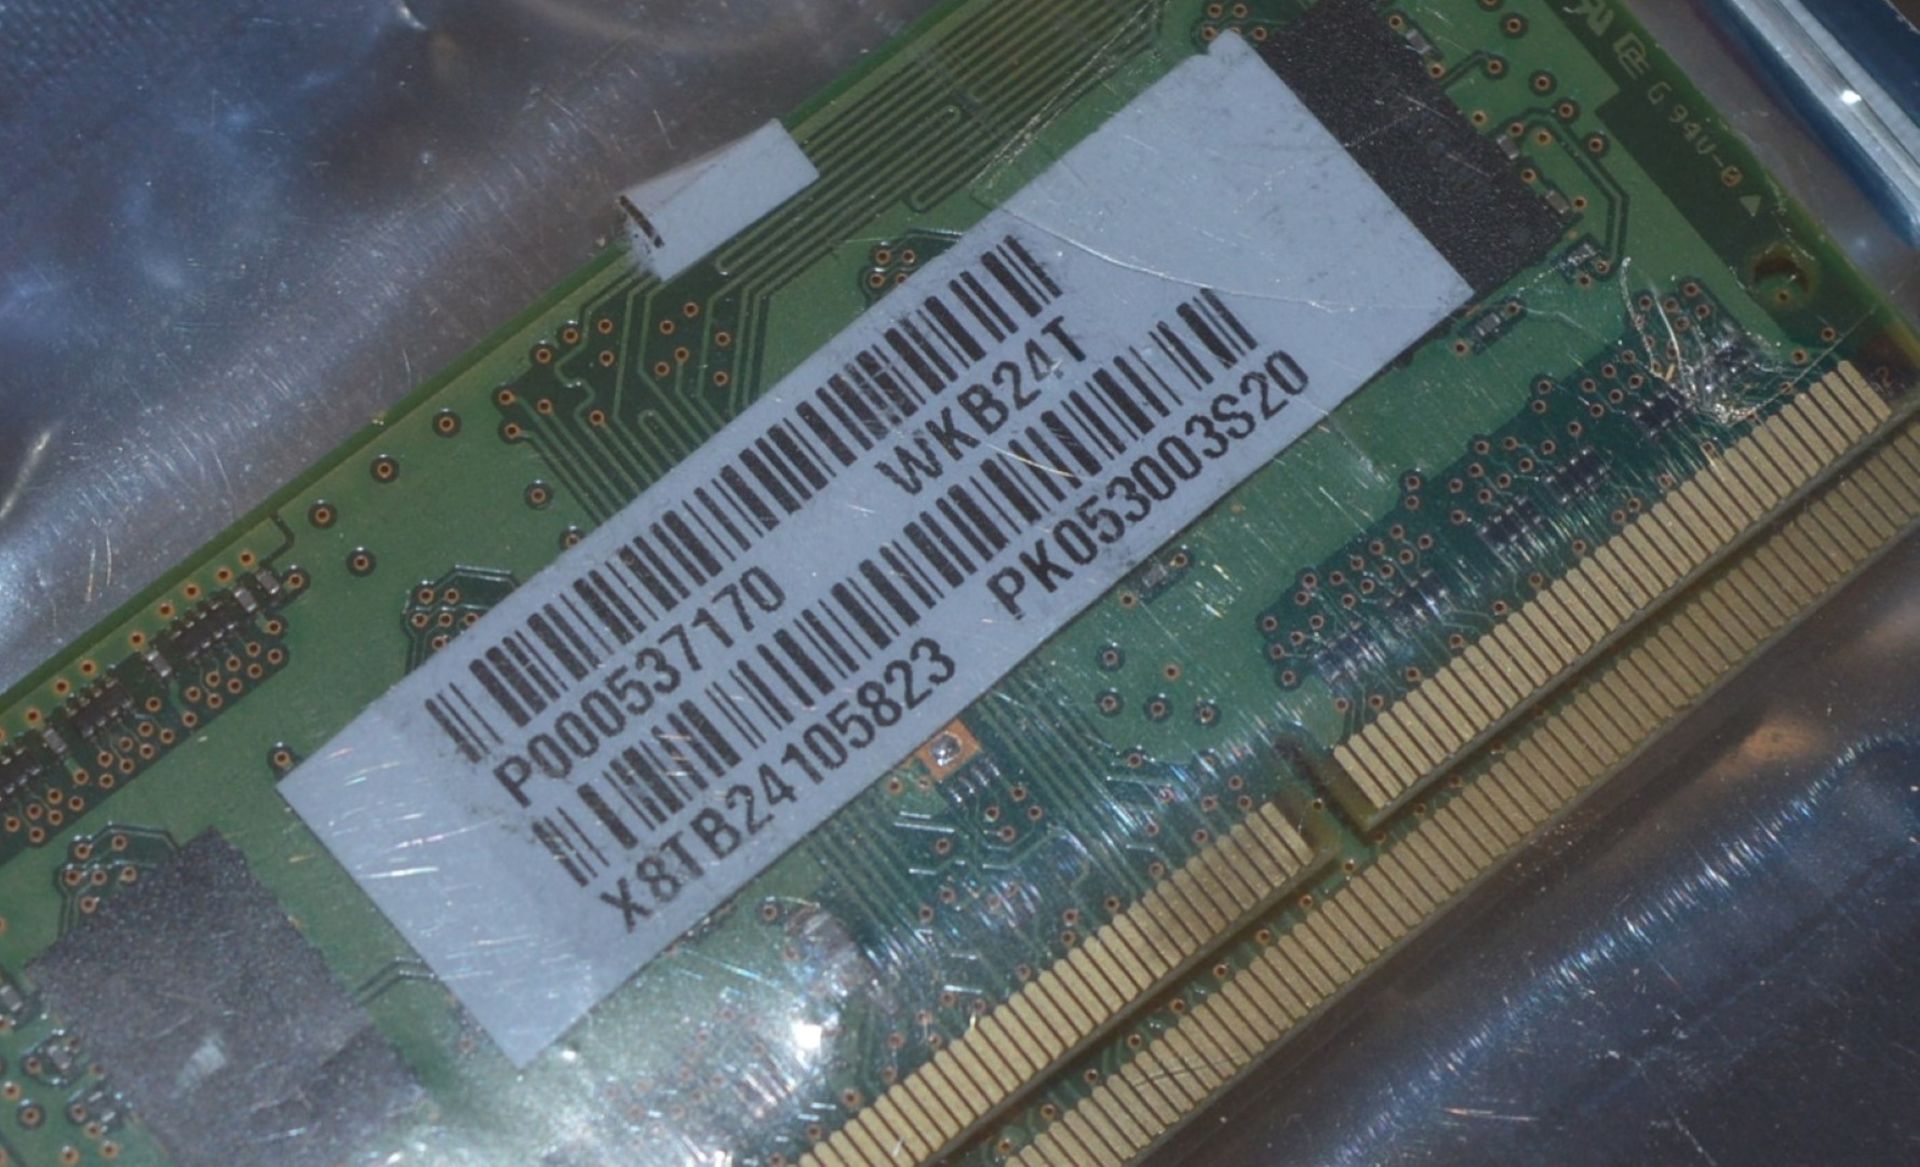 40 x Samsung 1gb DDR3 1333mhz Laptop Ram Modules - In Anti Static Bags - Removed From Working - Image 3 of 3